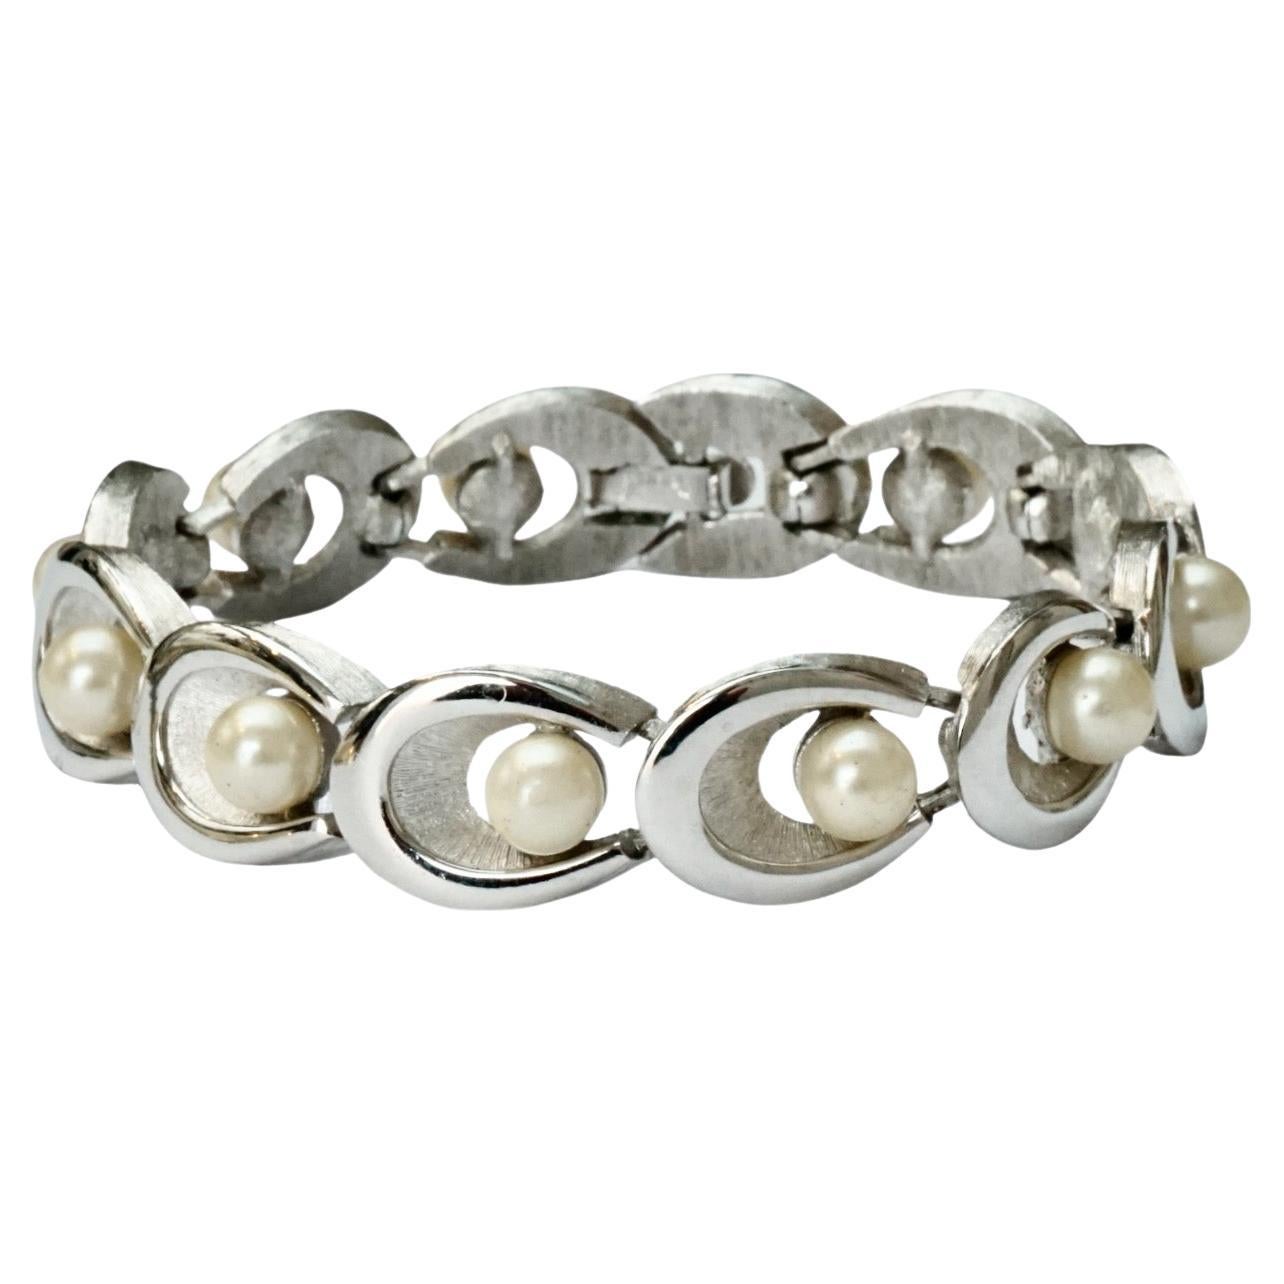 Trifari Silver Plated Brushed and Shiny Bracelet with Faux Pearls circa 1960s